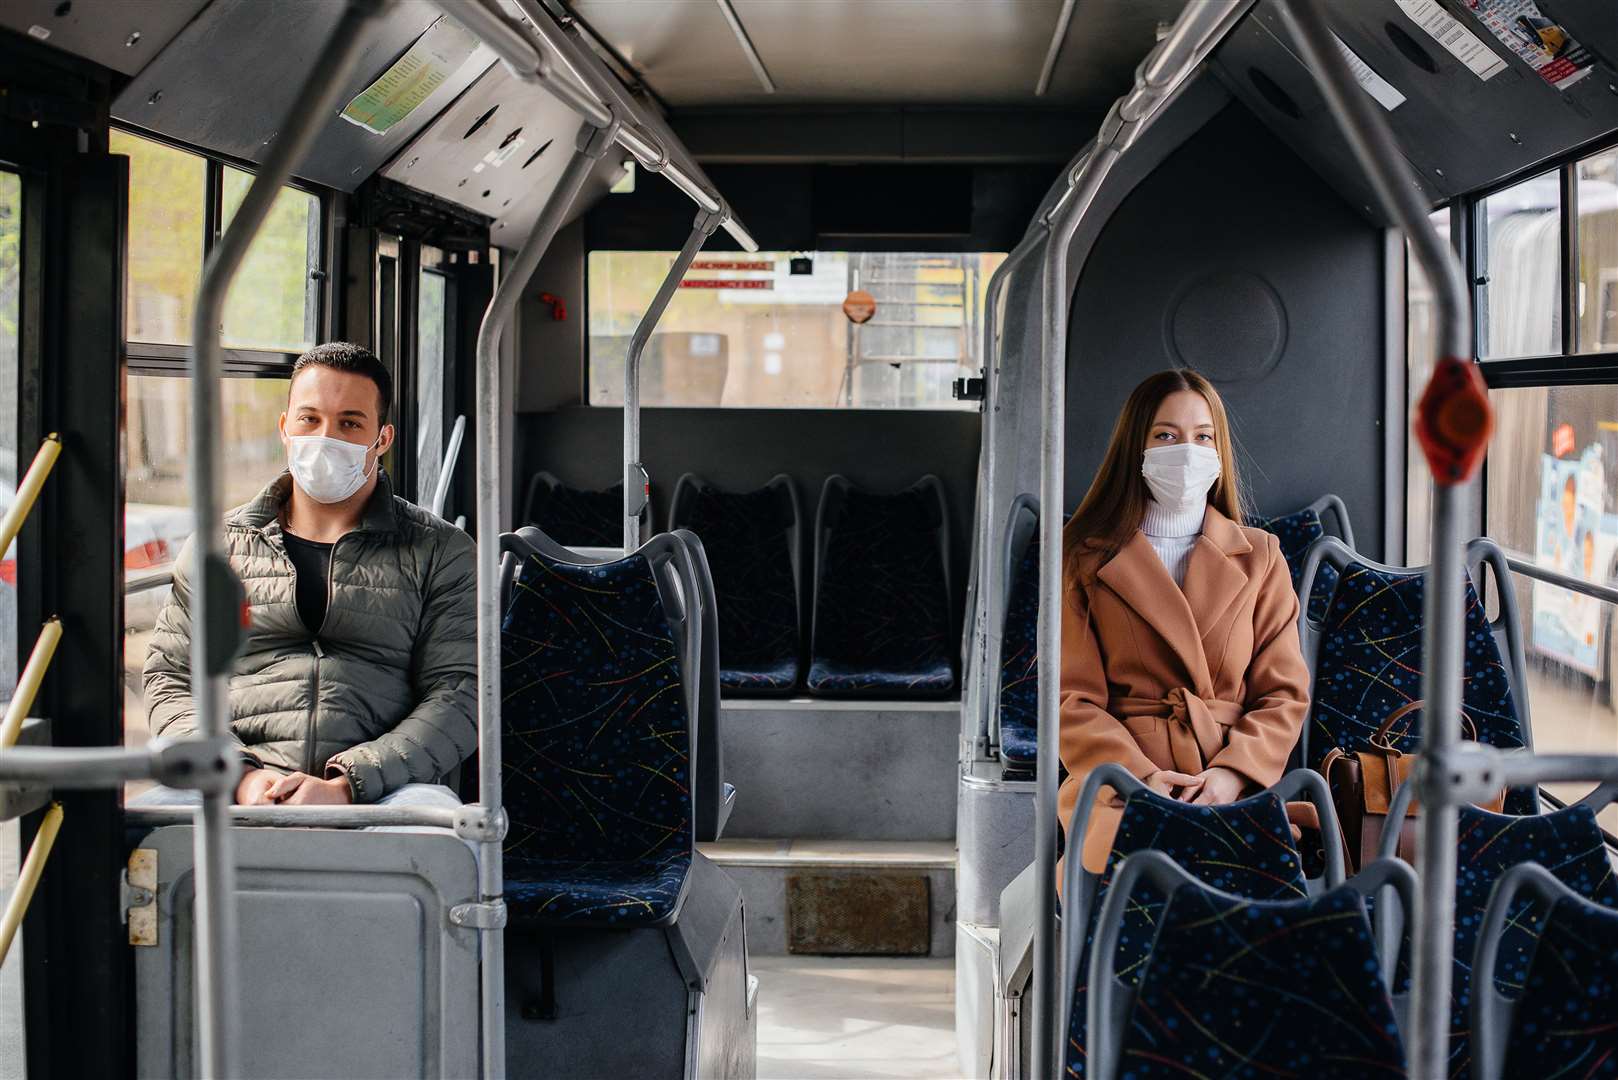 Even though it might no longer be a legal requirement inn Scotland in the near future, wearing face coverings and maintaining social distance on public transport – along with observing other measures designed to reduce Covid transmission – may still be wise.